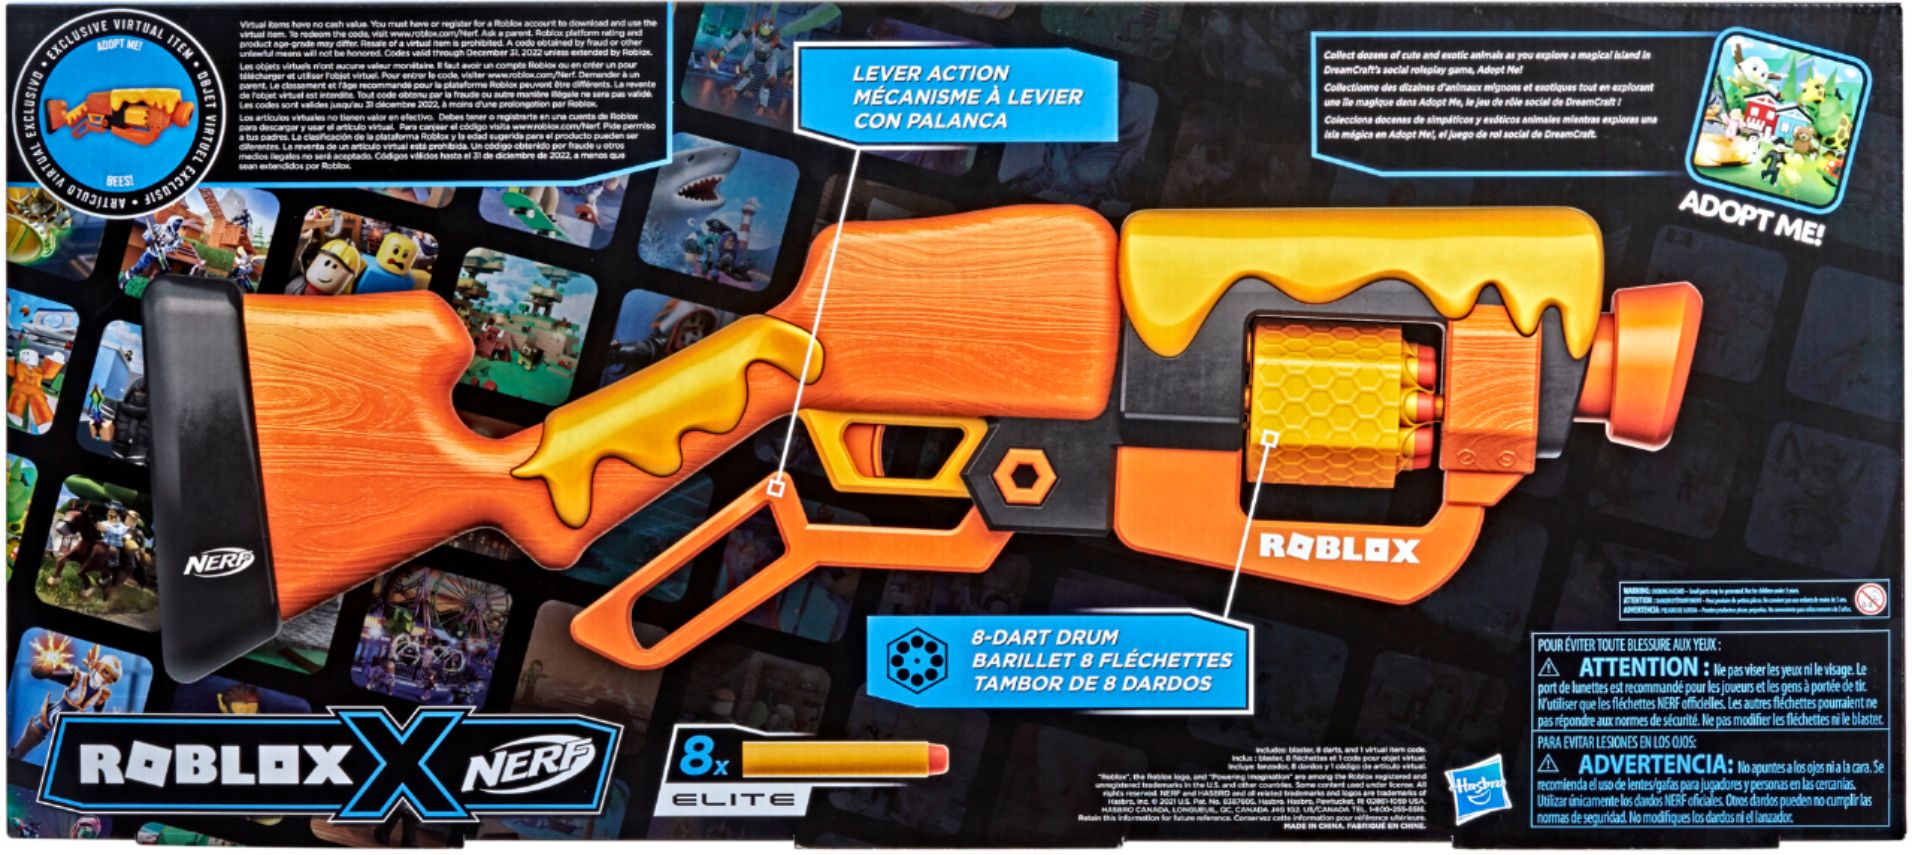 Nerf Roblox Adopt Me! BEES! Lever Action Blaster Gun with Rotating 8-Dart  Drum